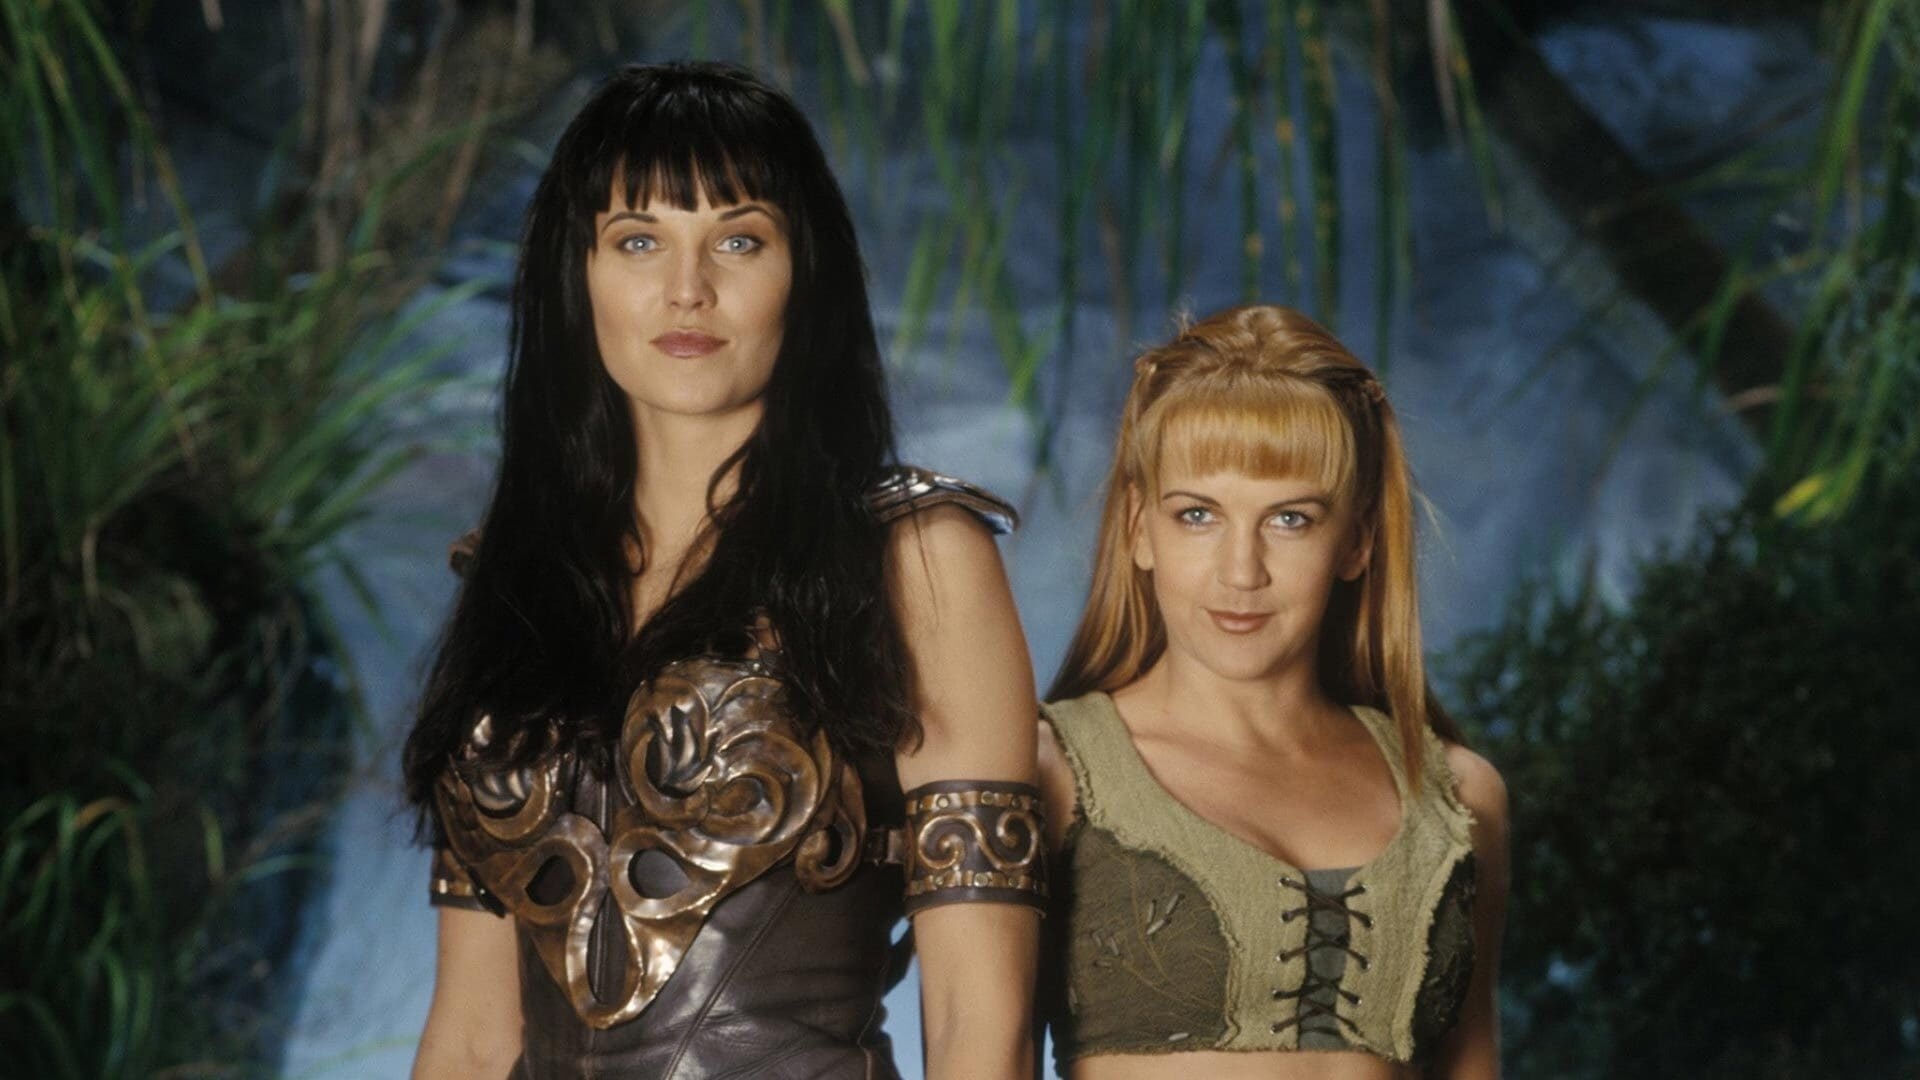 Xena: Warrior Princess (TV Series): Lucy Lawless and Renee O'Connor as Gabrielle - the best friend and a soulmate. 1920x1080 Full HD Background.